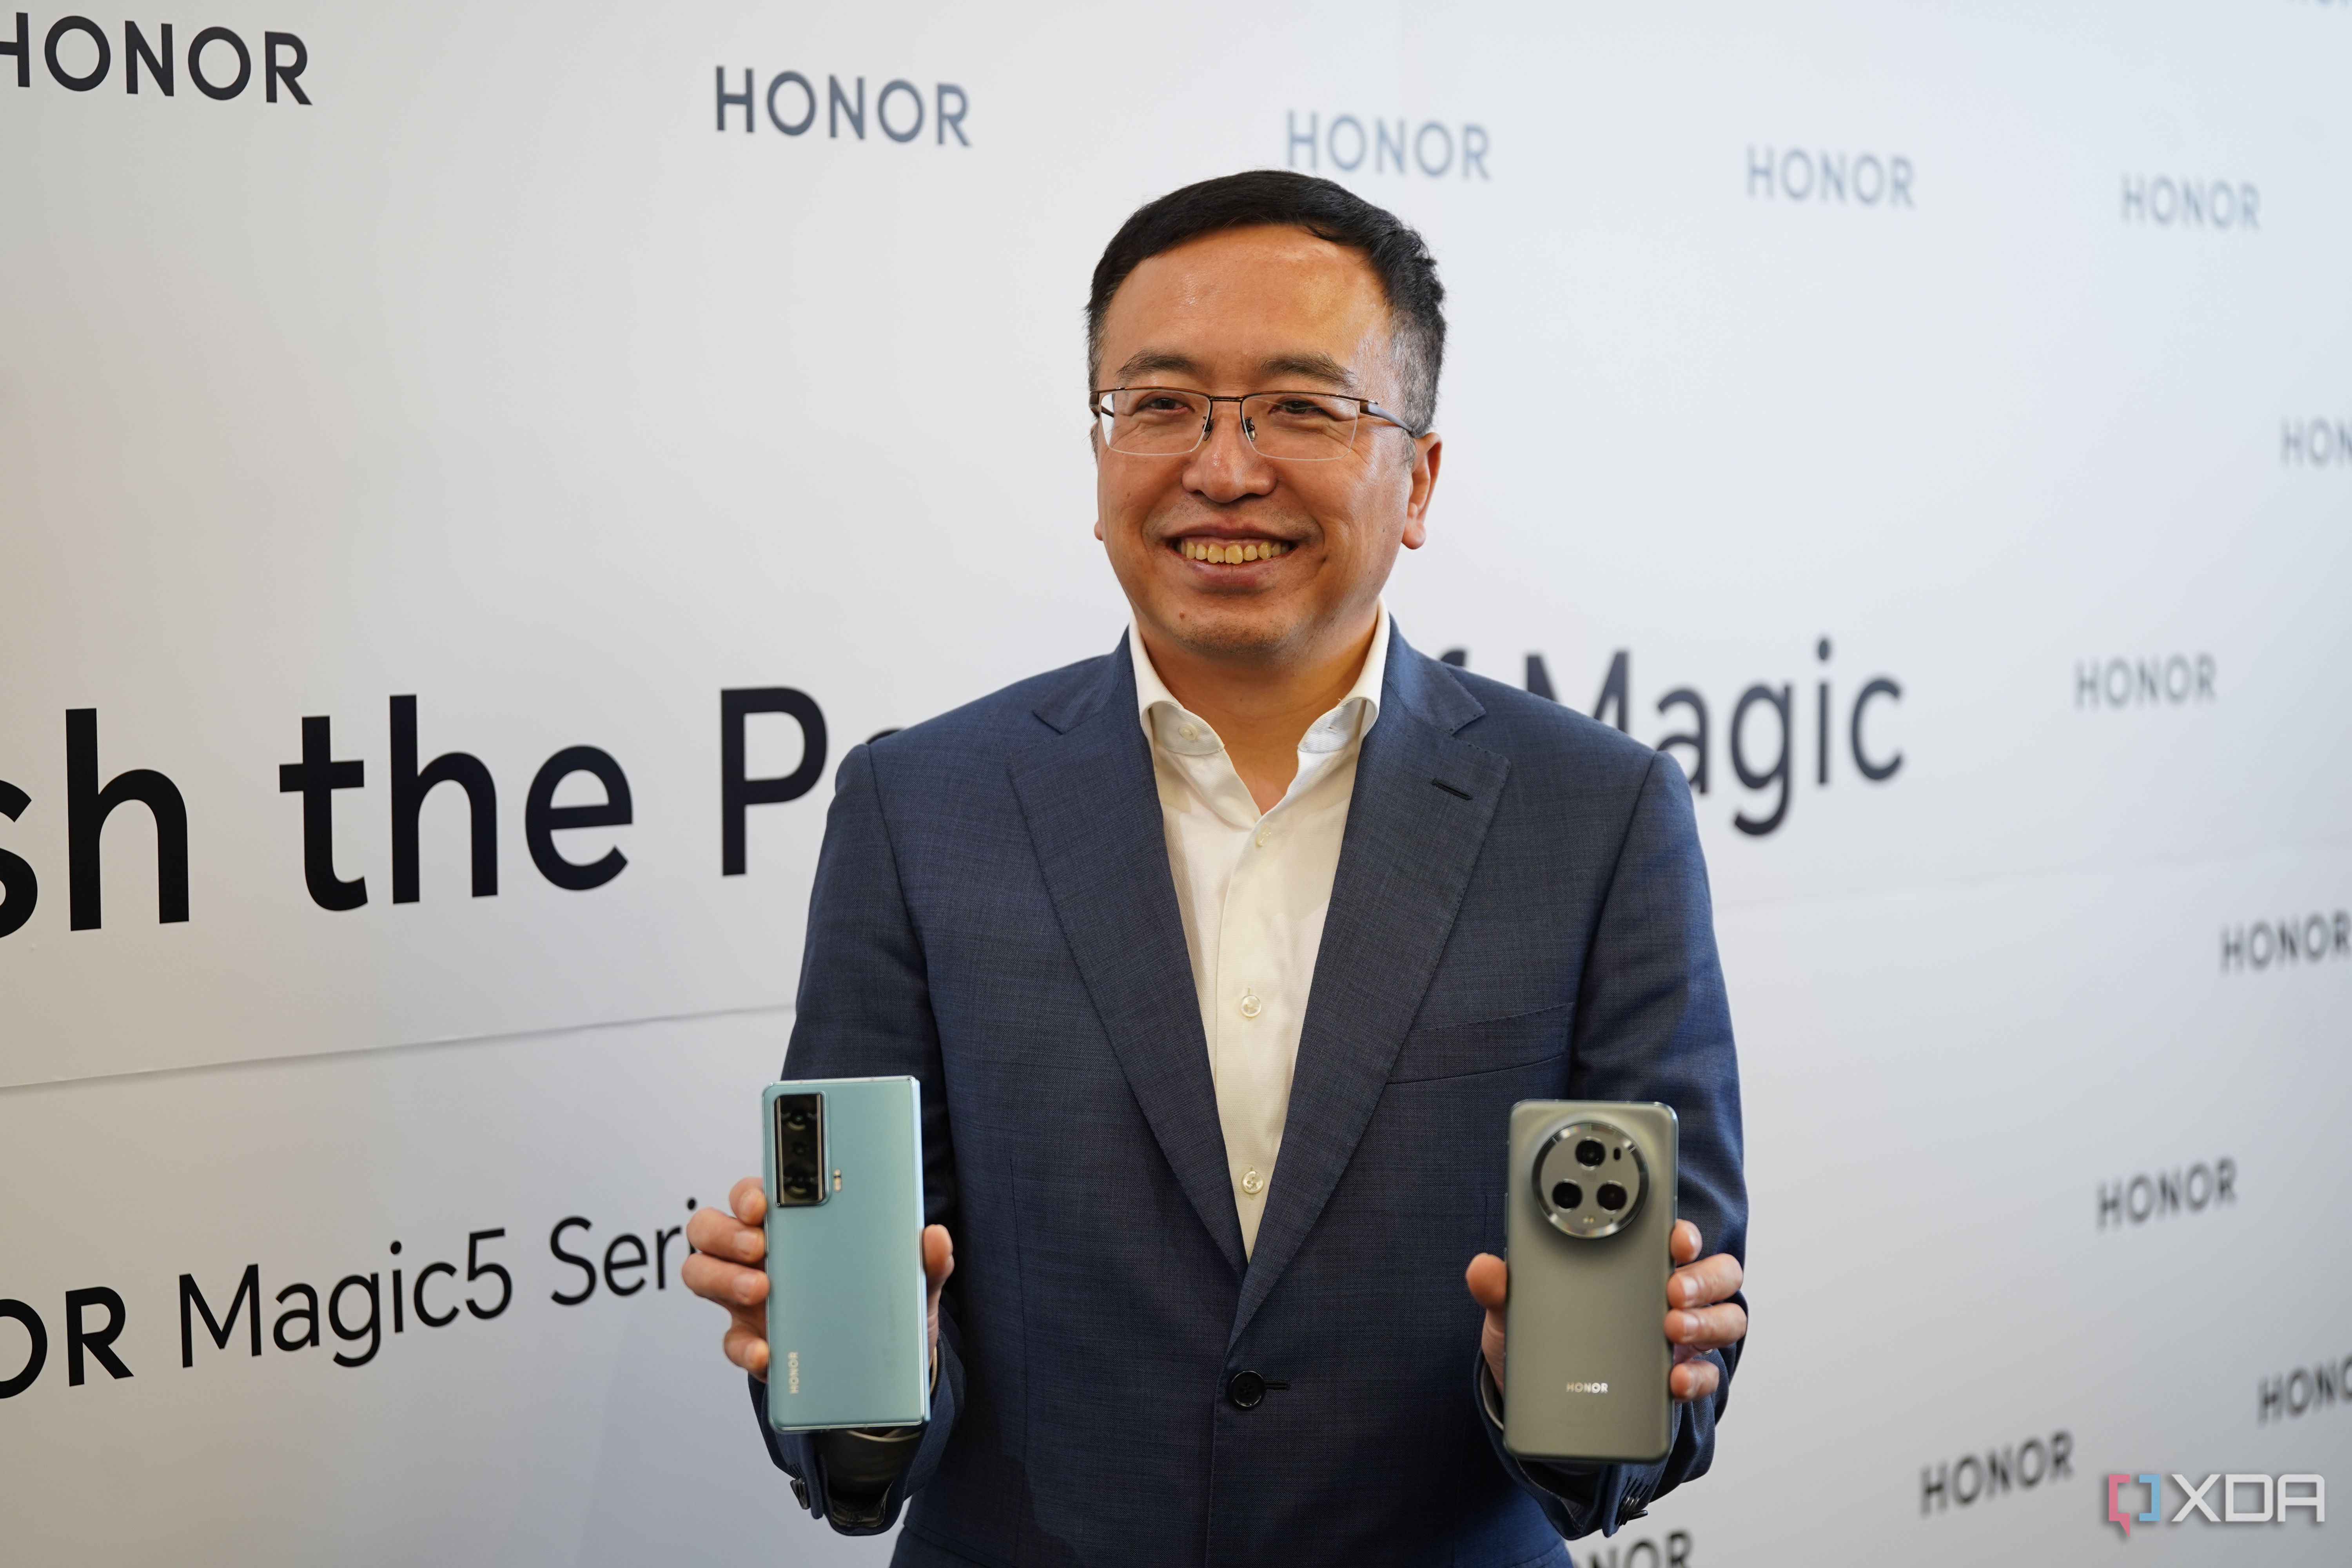 Honor CEO George Zhao standing with Honor flagship phones: Magic 5 Pro and Honor Magic Vs.